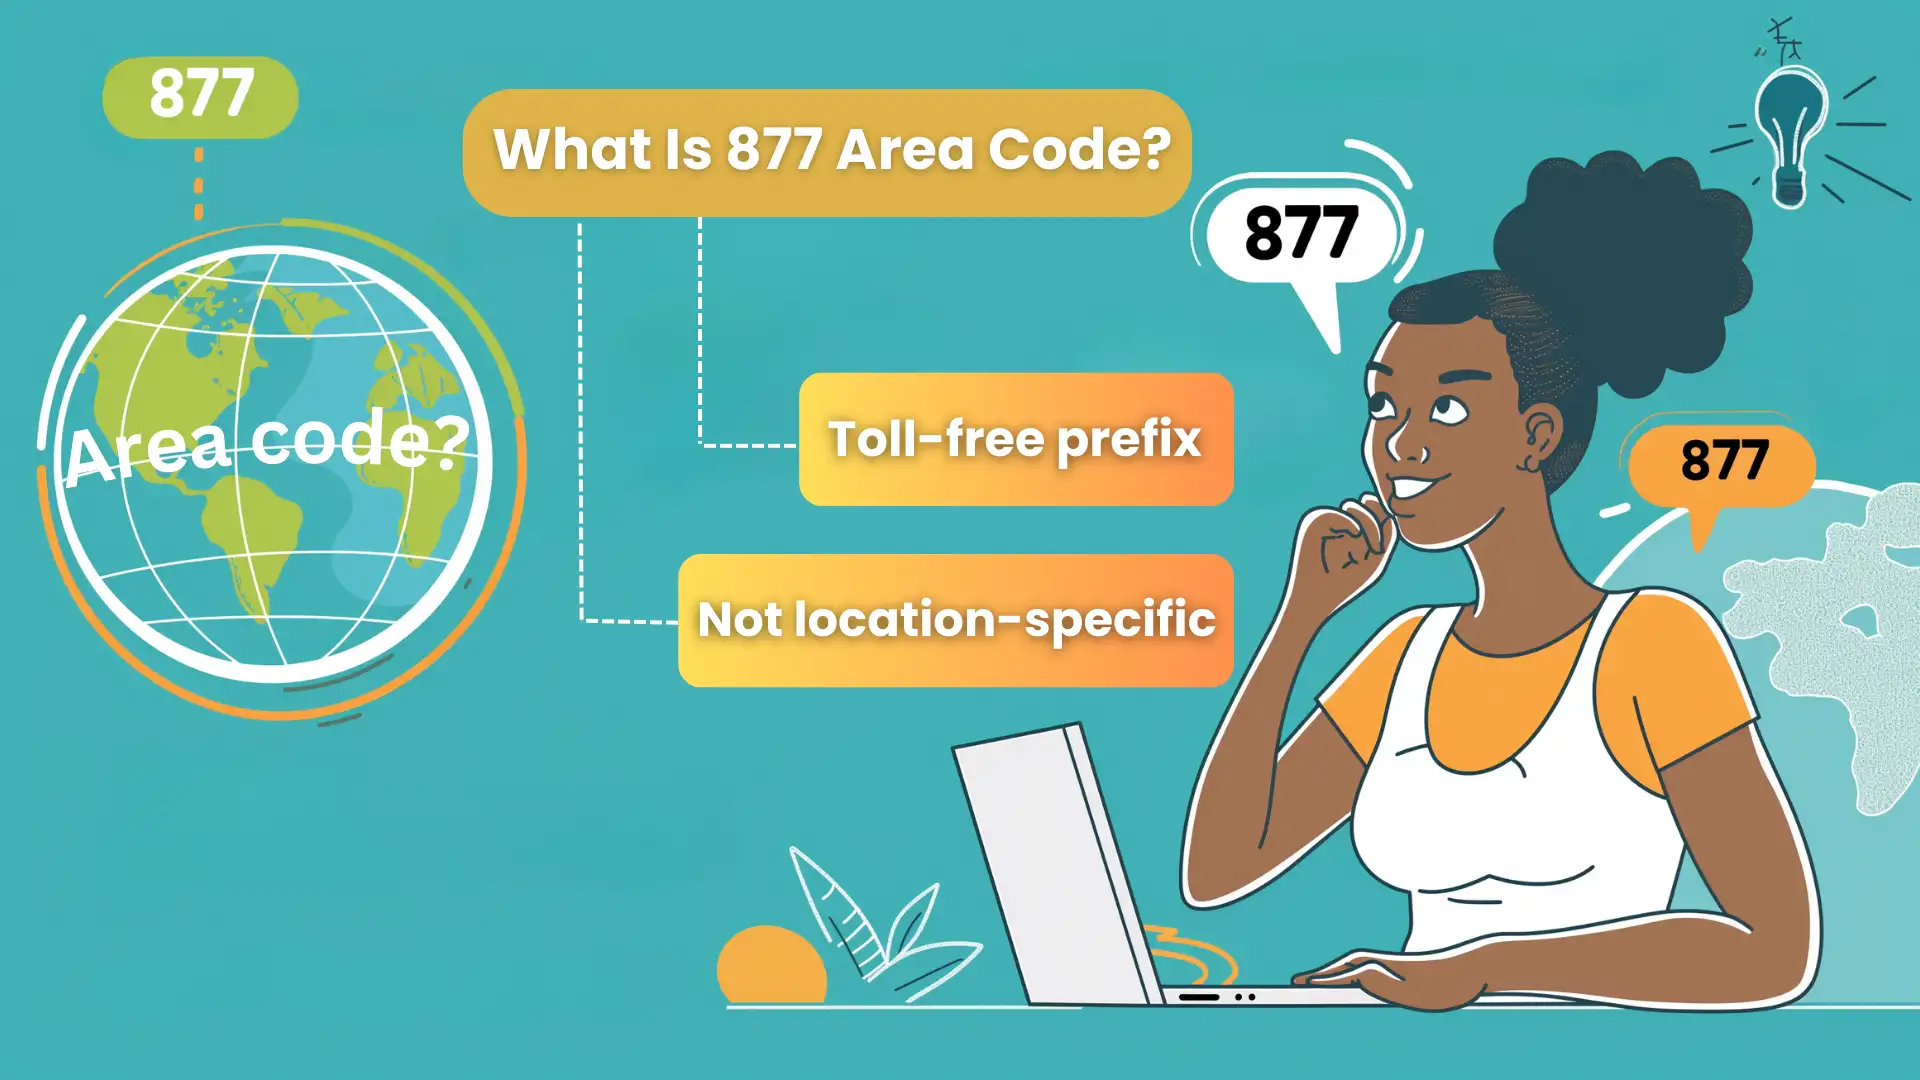 What Is the 877 Area Code?